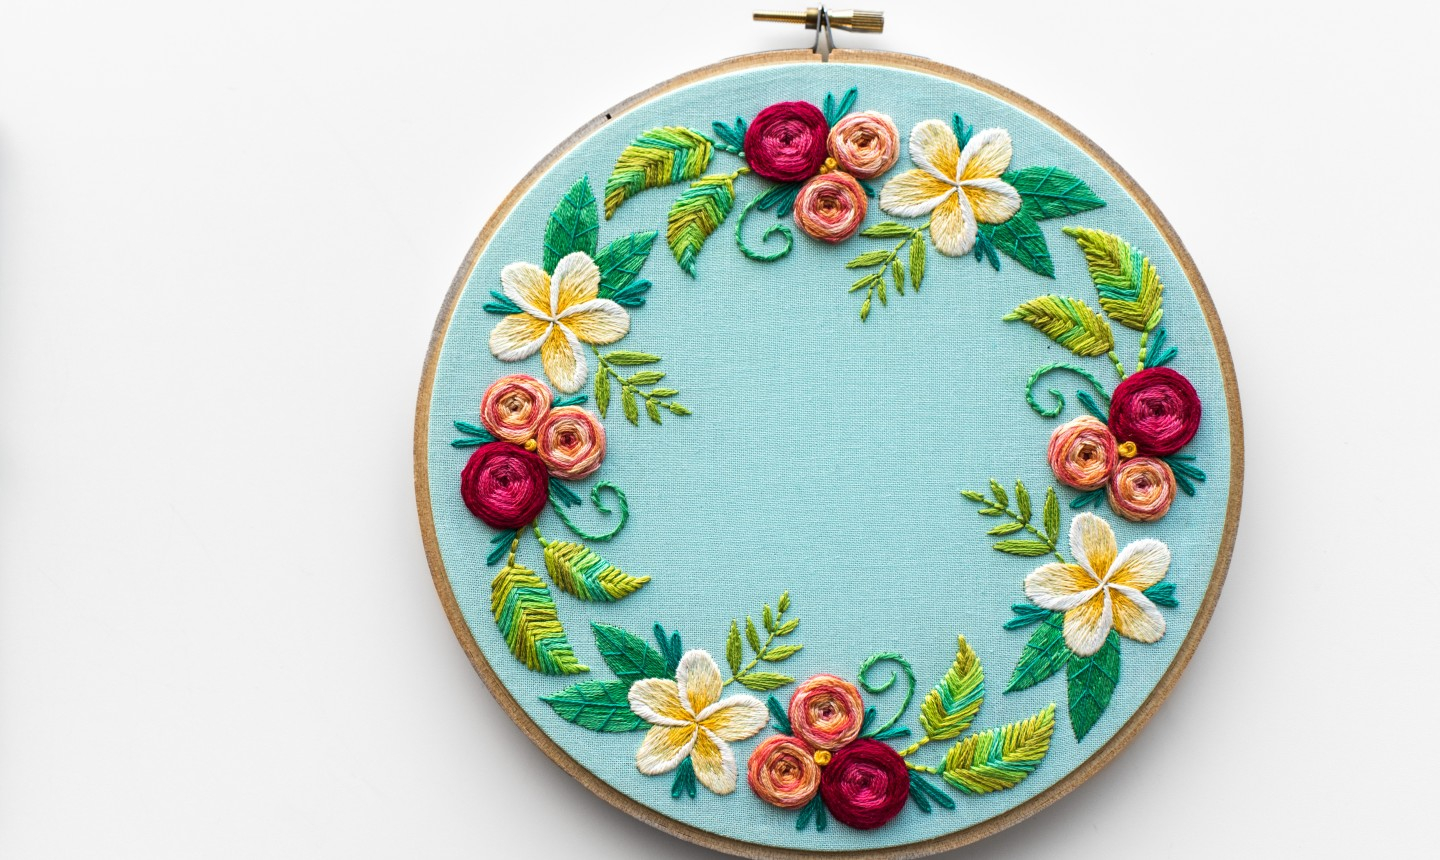 Herb Embroidery Patterns 5 Beginner Hand Embroidery Projects